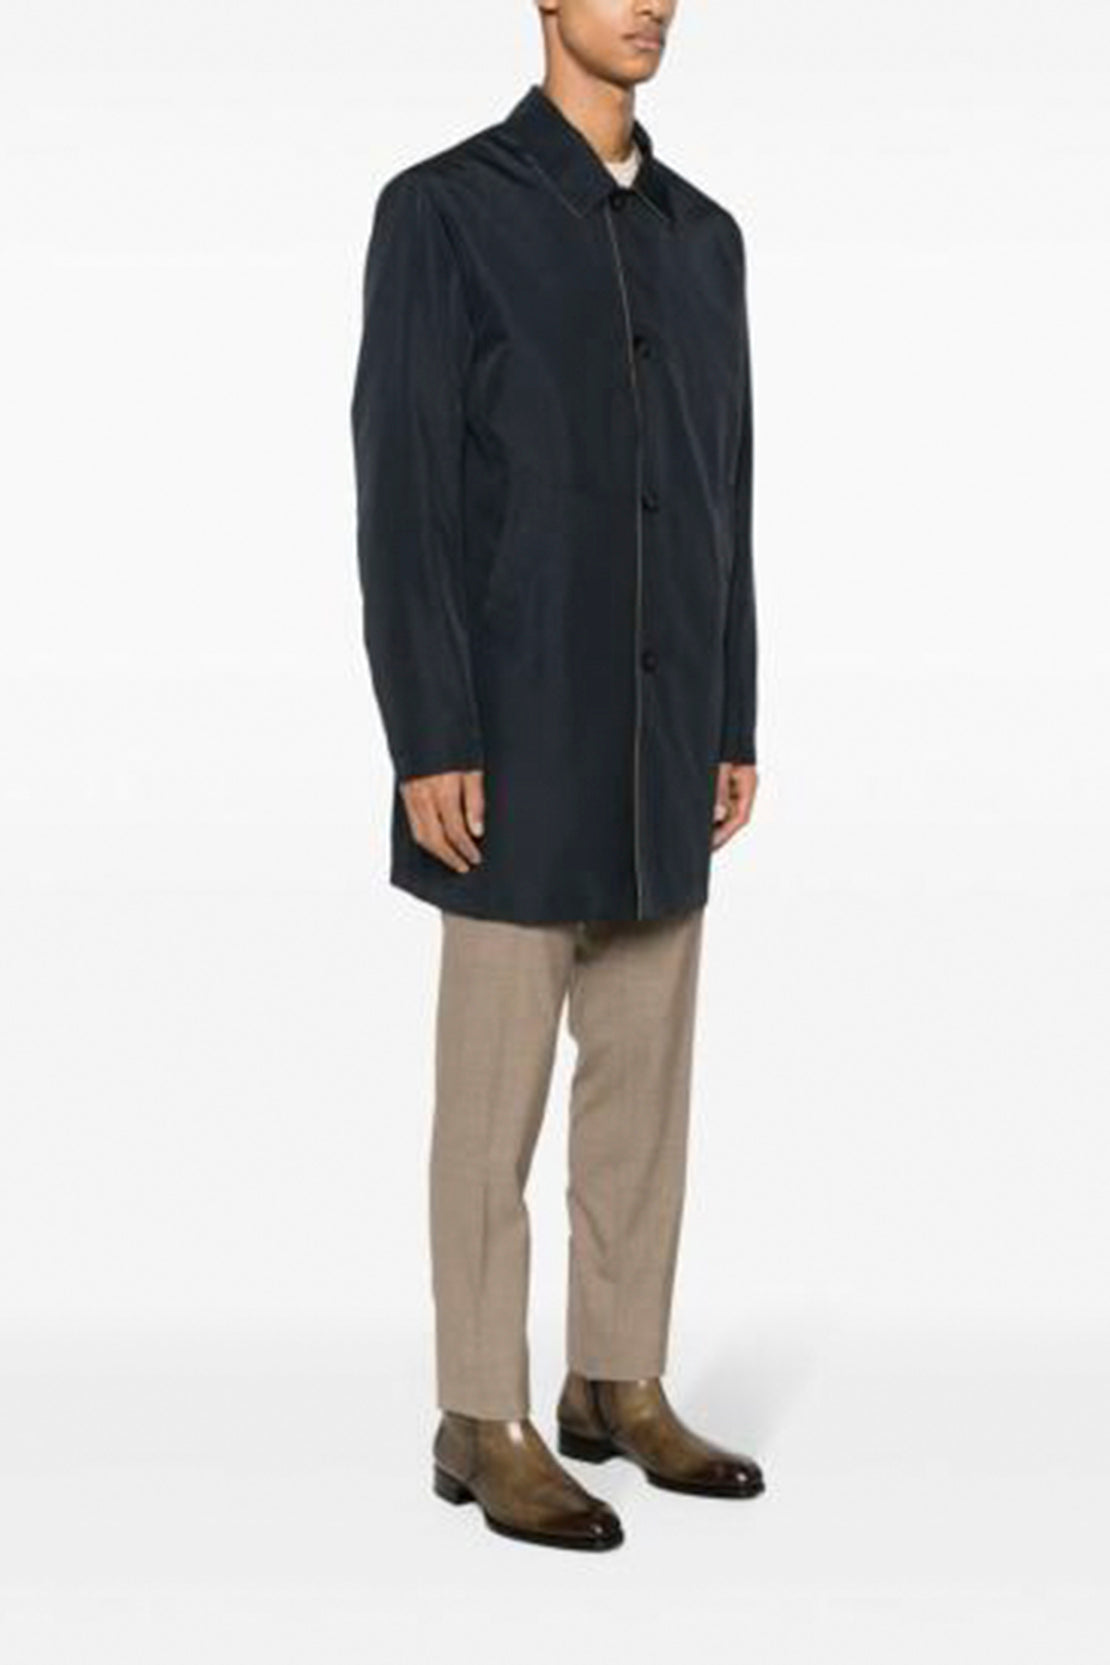 CANALI - Navy Blue and Beige REVERSIBLE Raincoat SG01121/308-O10454